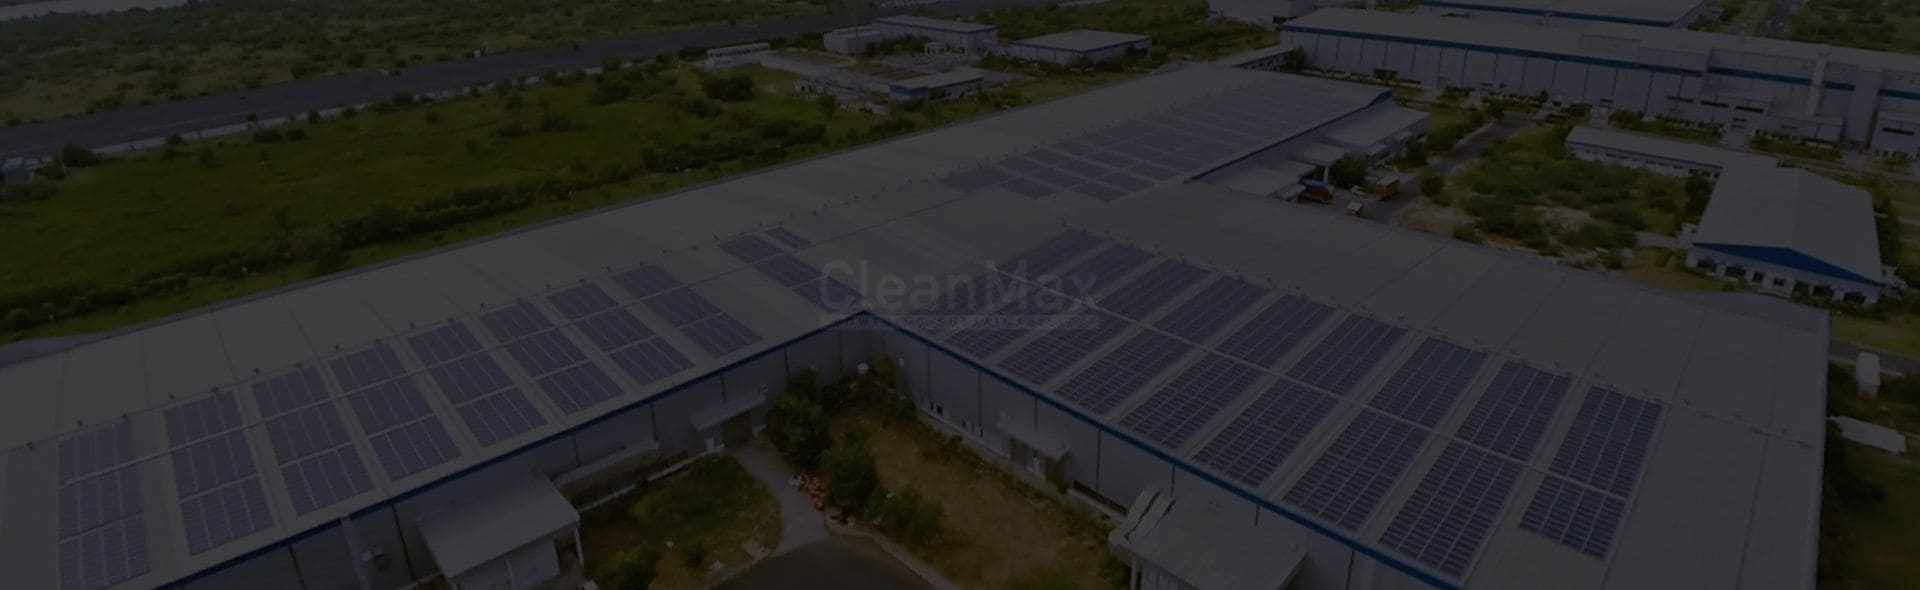 CleanMax's collaboration with Tata for solar energy initiatives